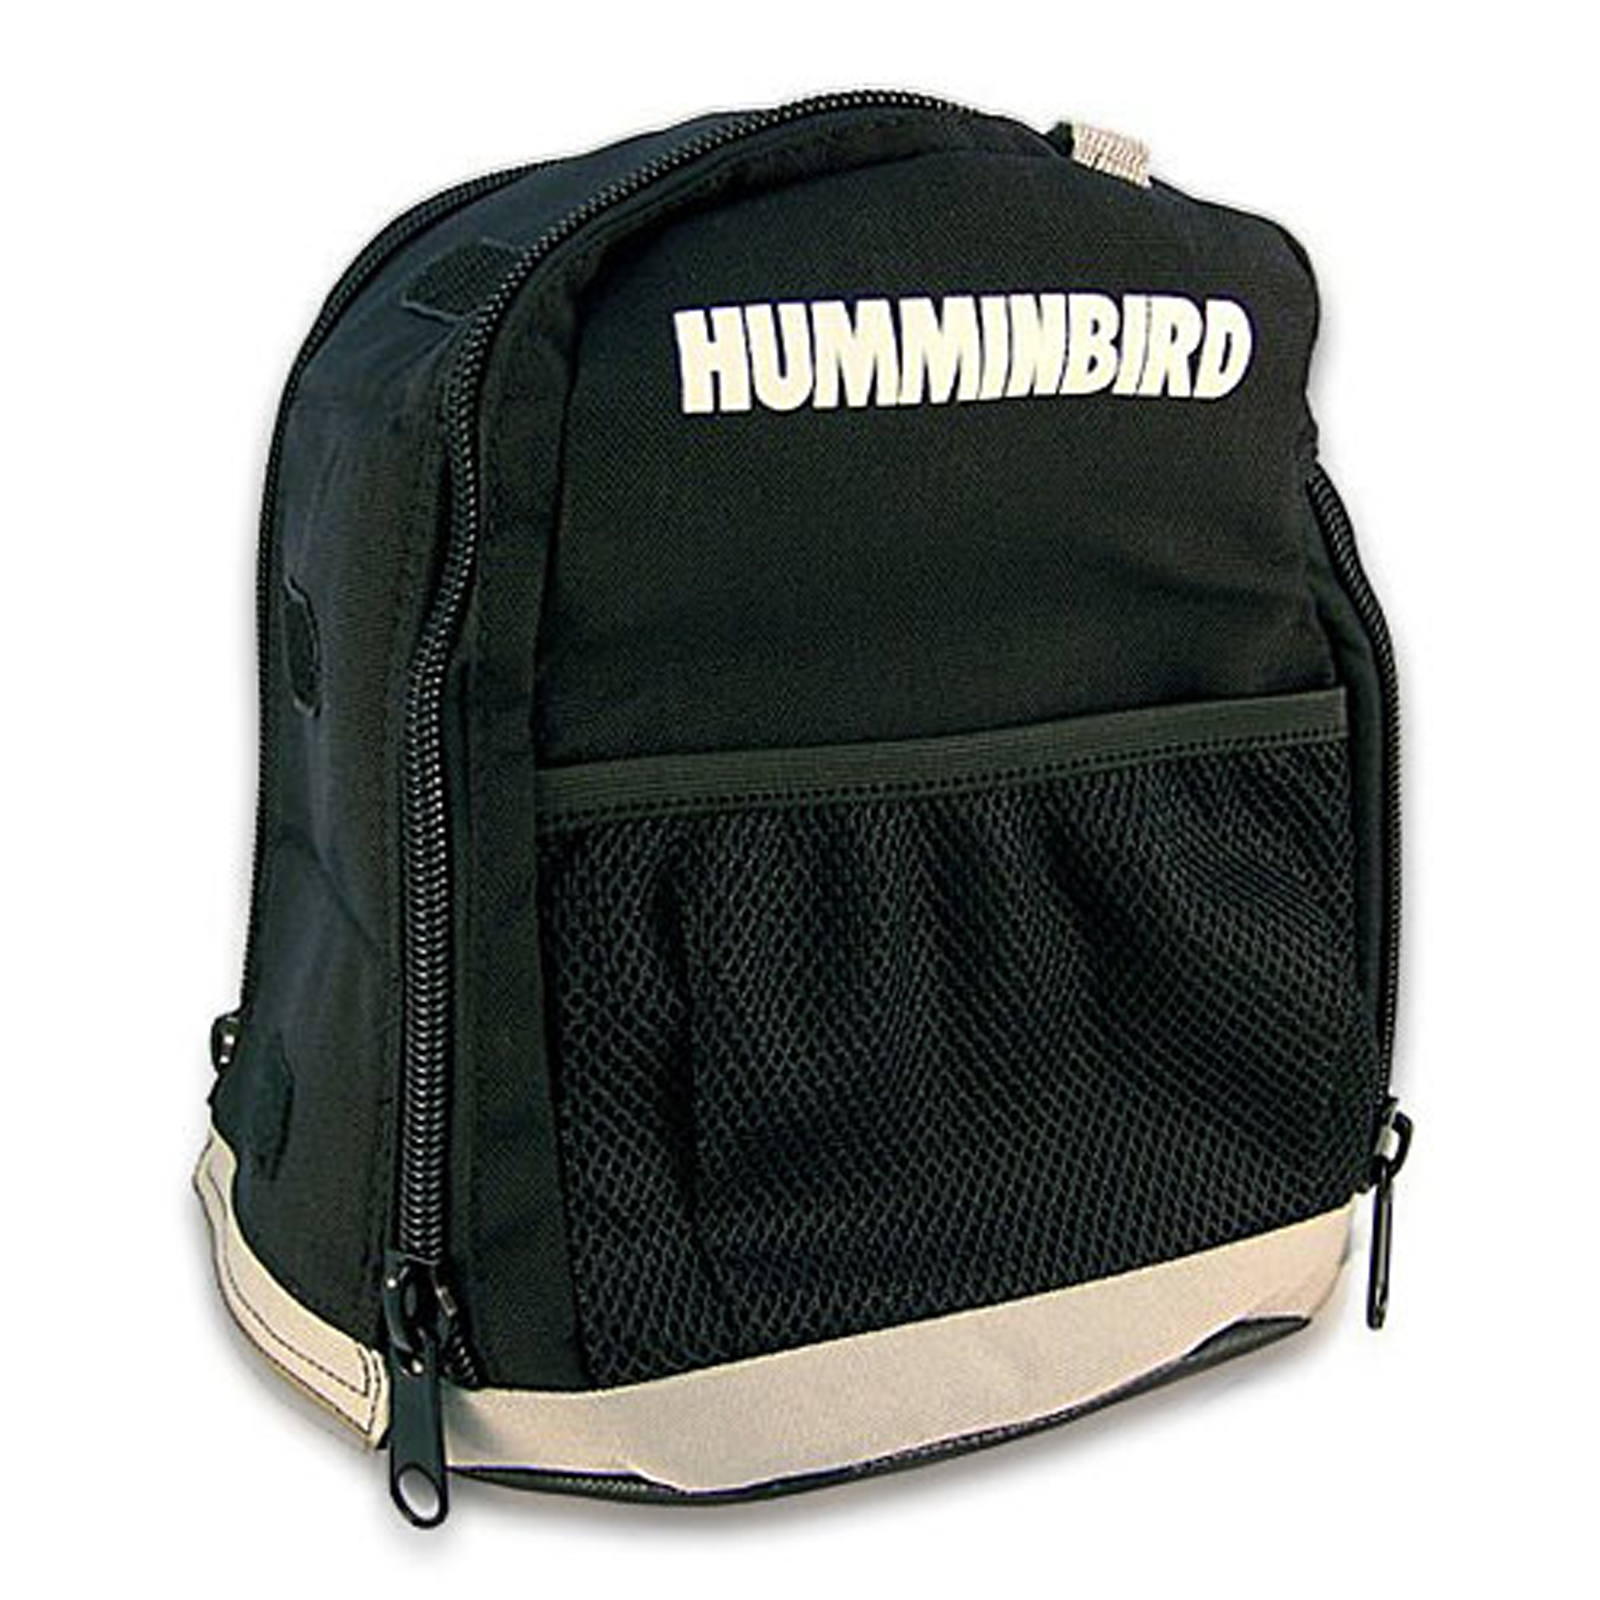 Humminbird Flasher Soft Sided Carrying Case